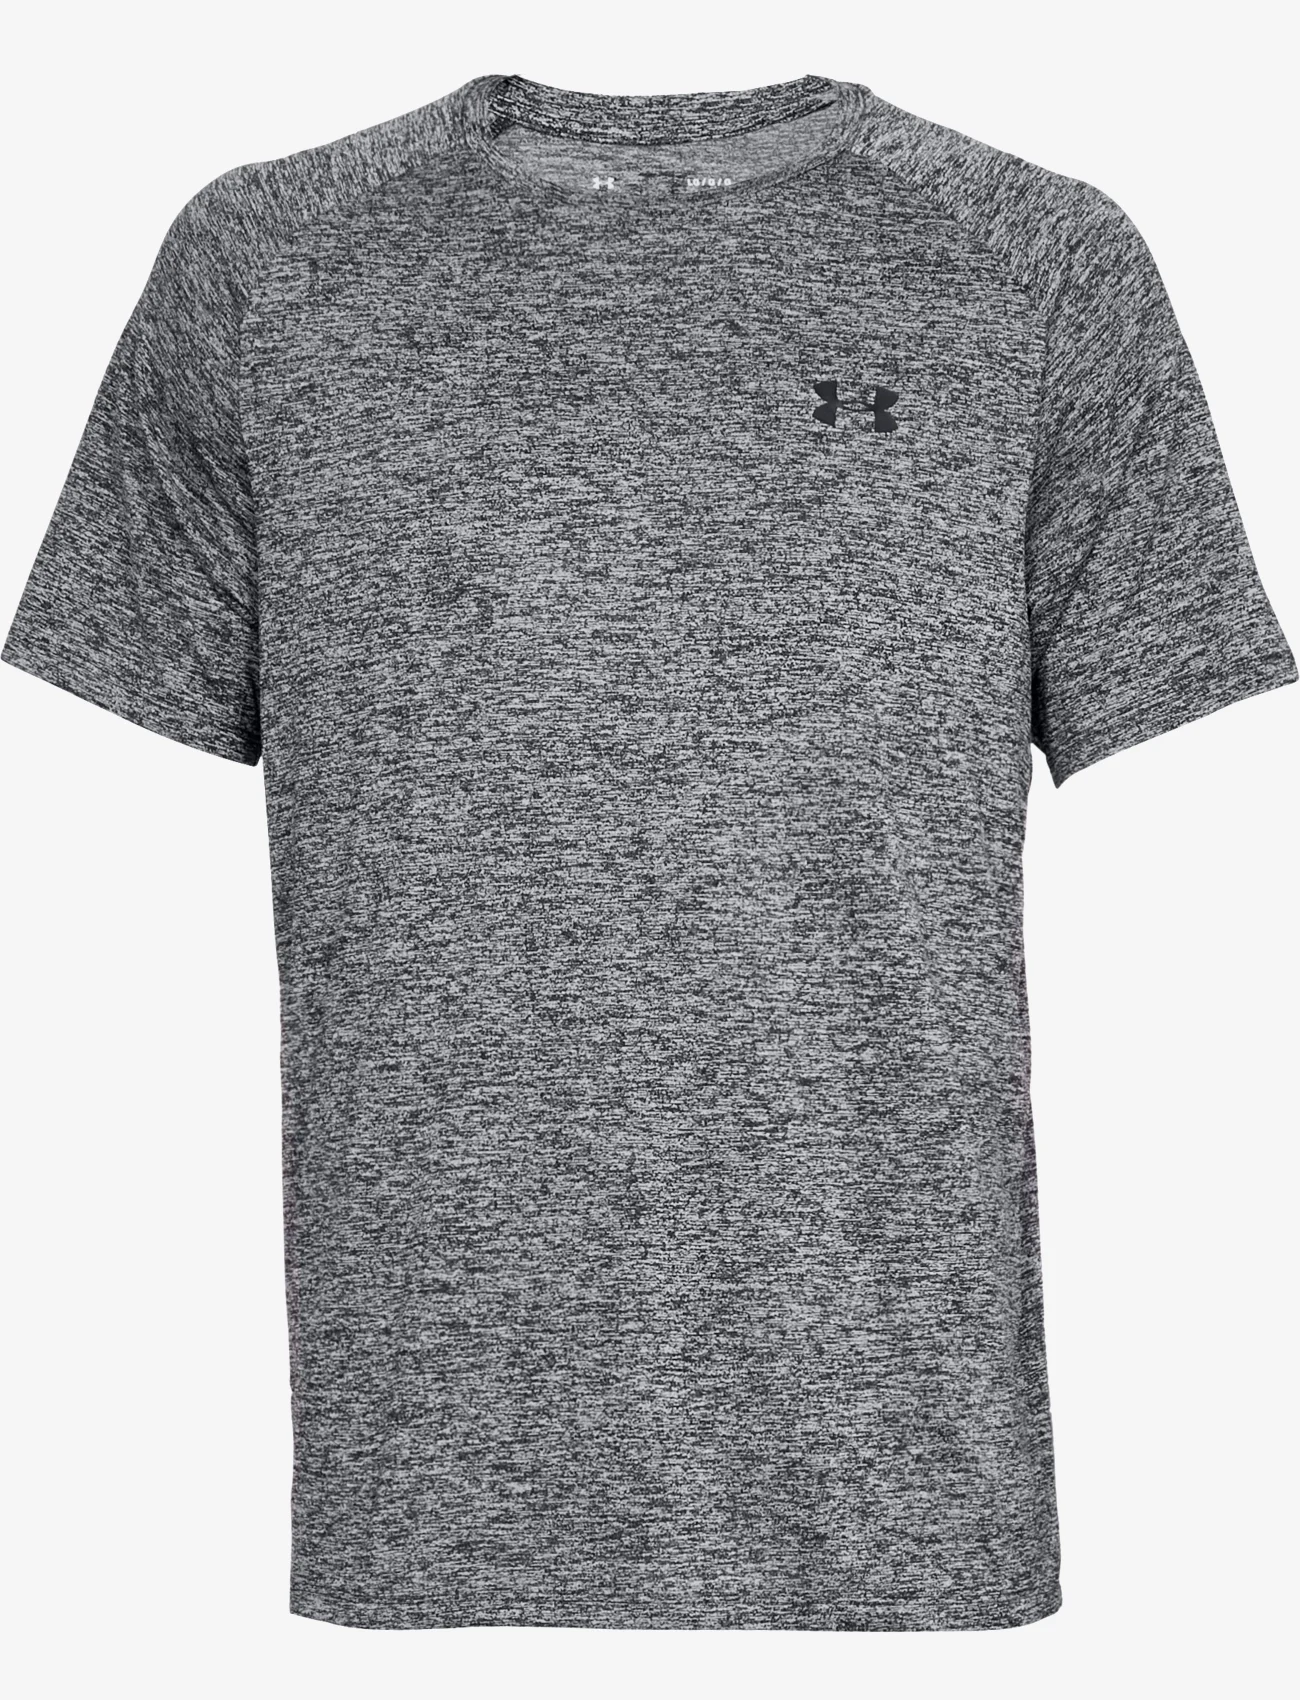 Under Armour - UA Tech 2.0 SS Tee - lowest prices - black - 0